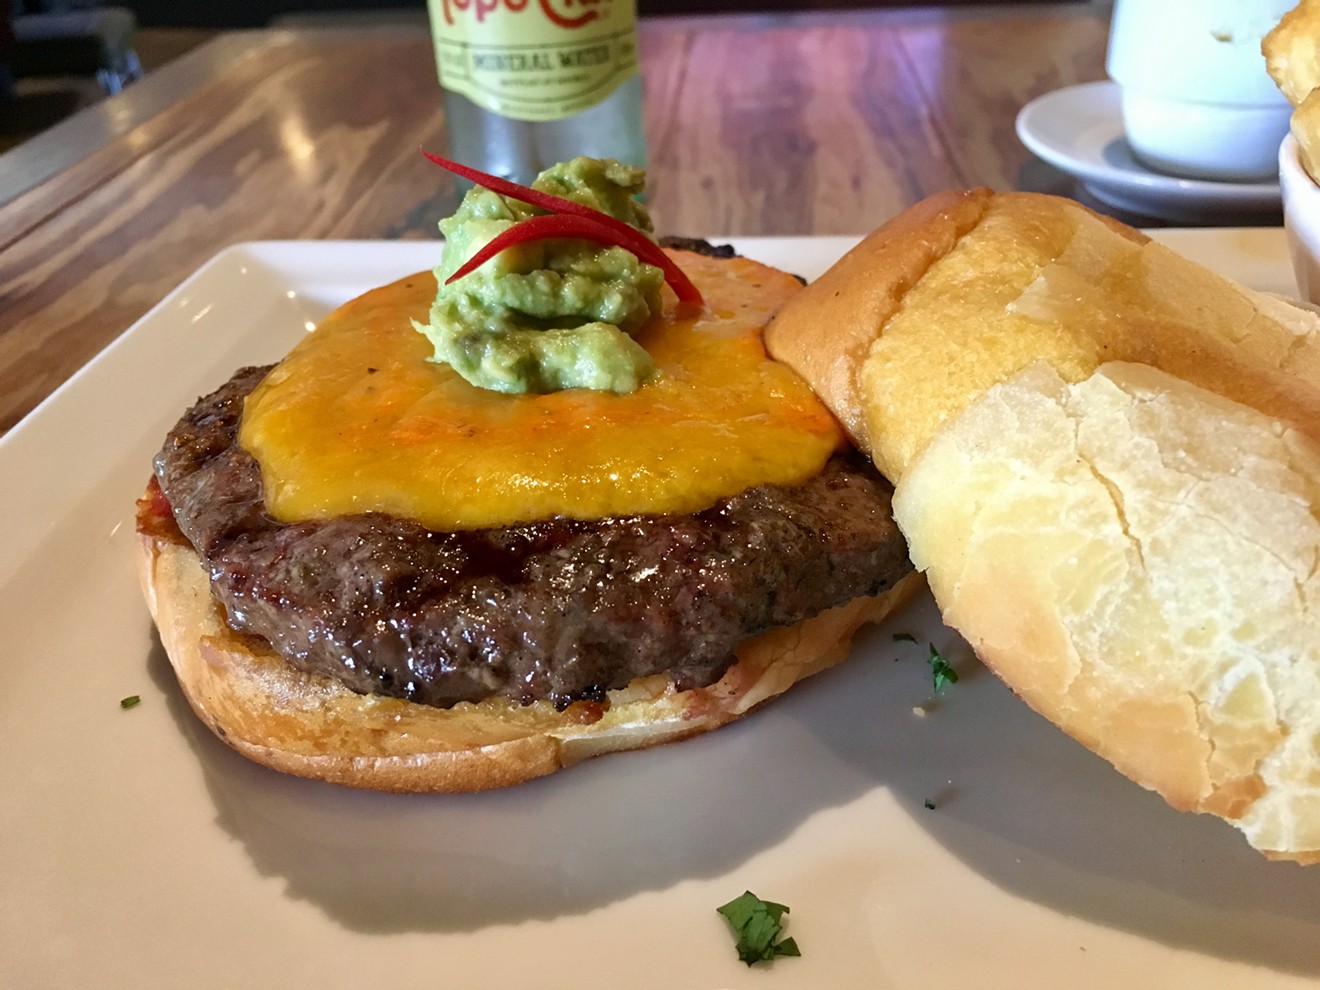 Writer Nick Rallo was a big fan of the  "Andes Burger" at Nazca Kitchen. (Editor's note: The fries were phenomenal, too.)